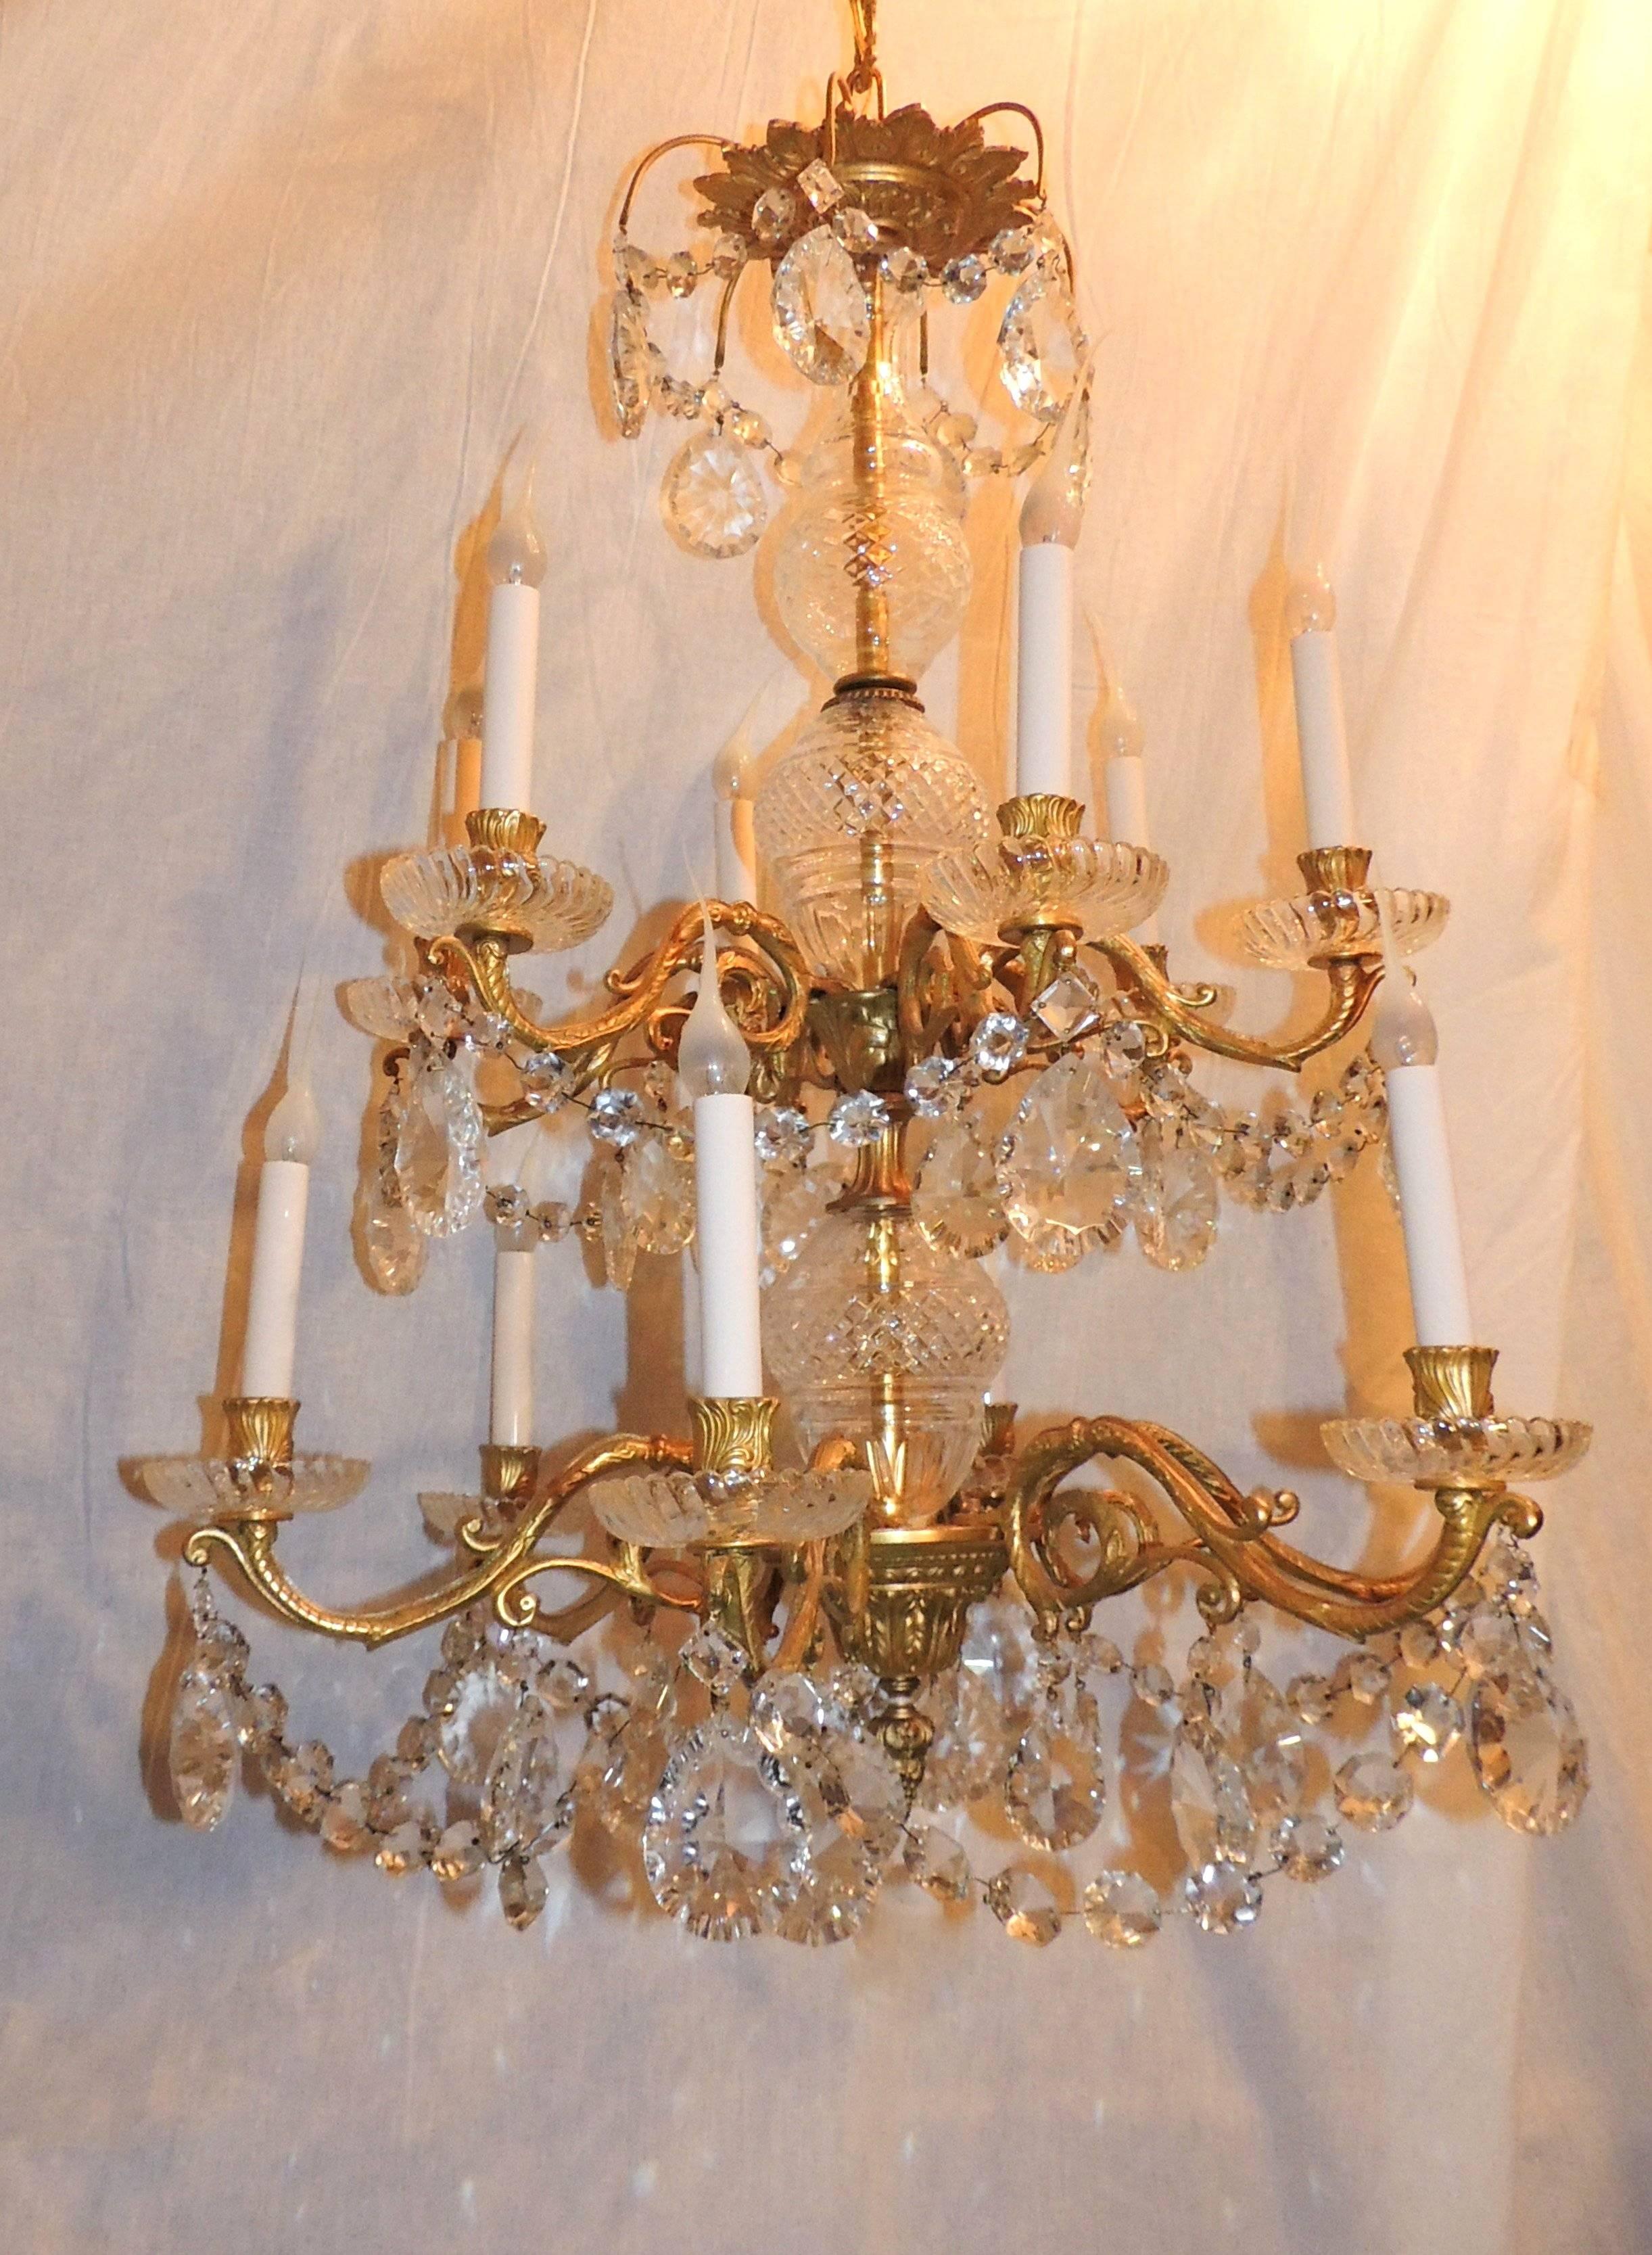 Wonderful doré bronze three-tier 12-arm chandelier with beautiful cut crystal center and draped crystal accenting the tiers finished with floral and filigree detail on the bronze chandelier and canopy.

Measures: 36